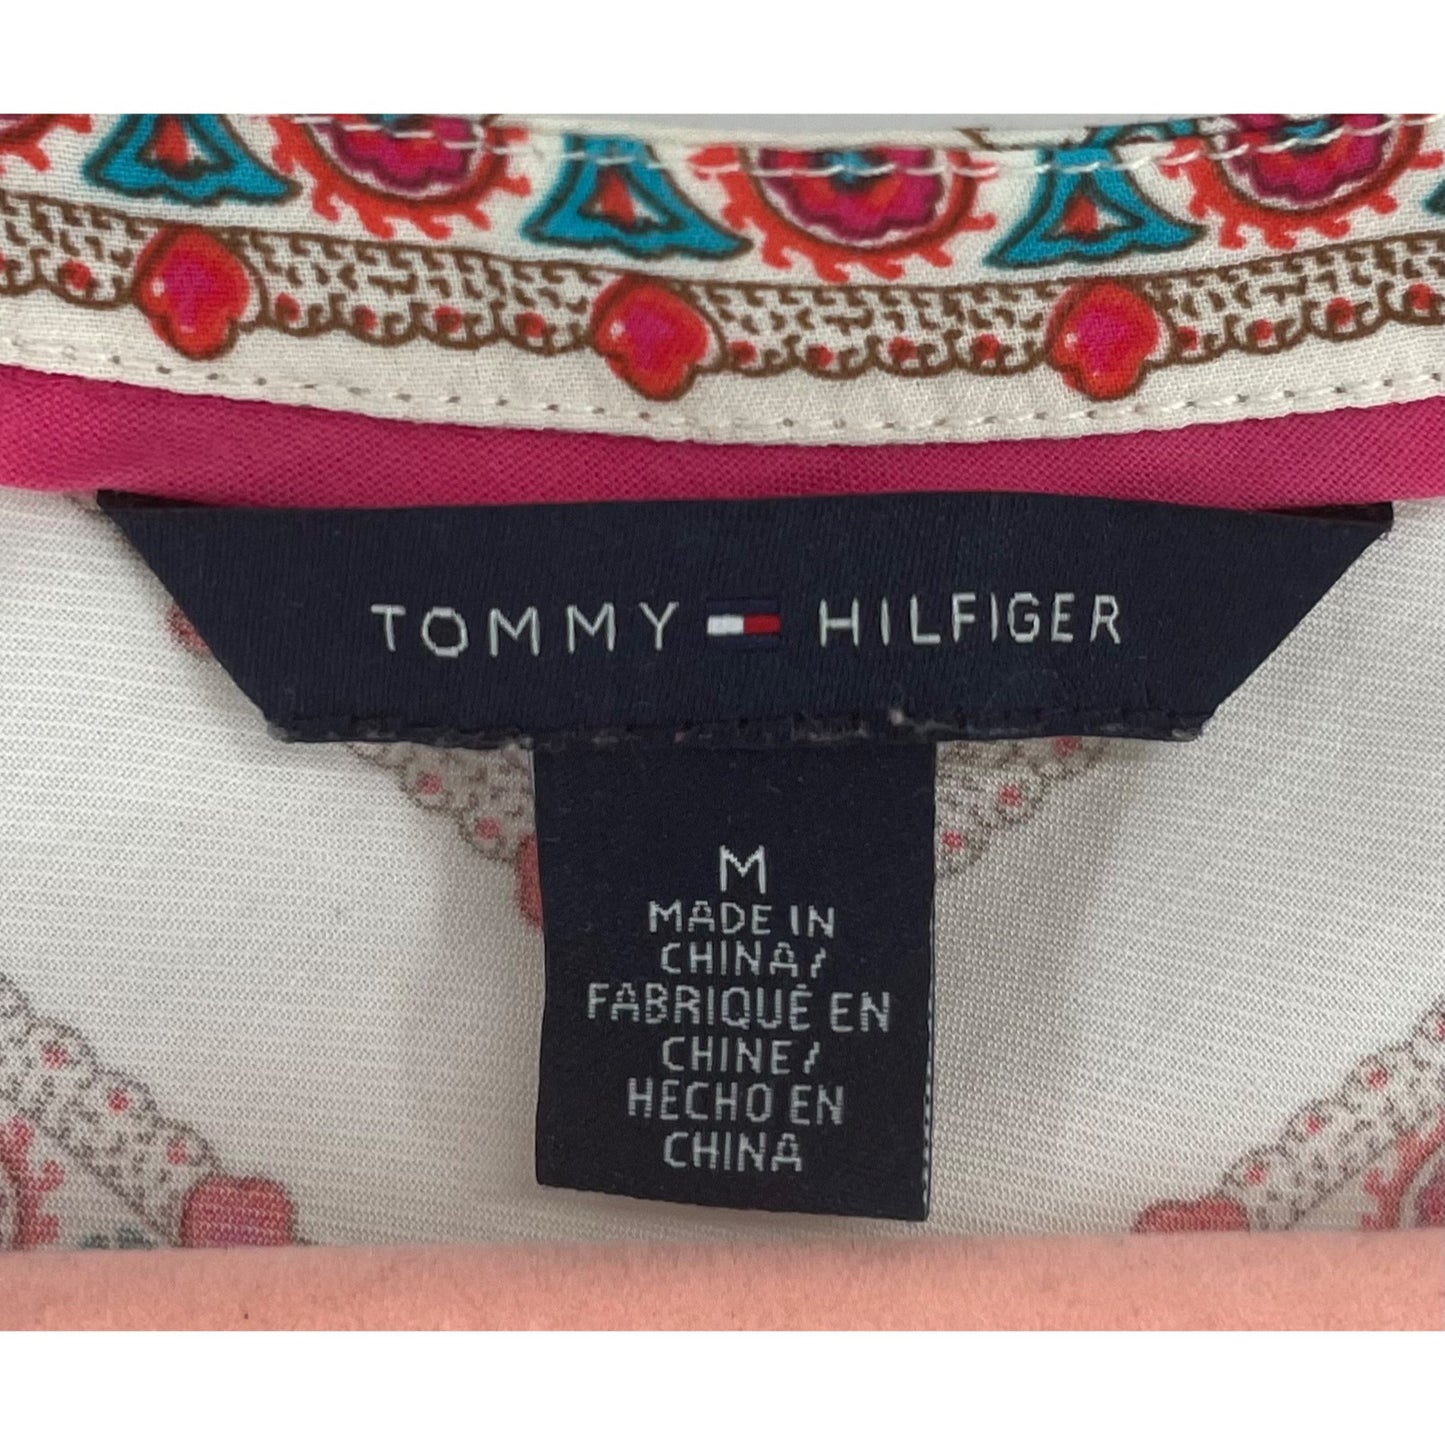 Tommy Hilfiger Women's Size Medium Multi-Colored Paisley Tank Top Blouse